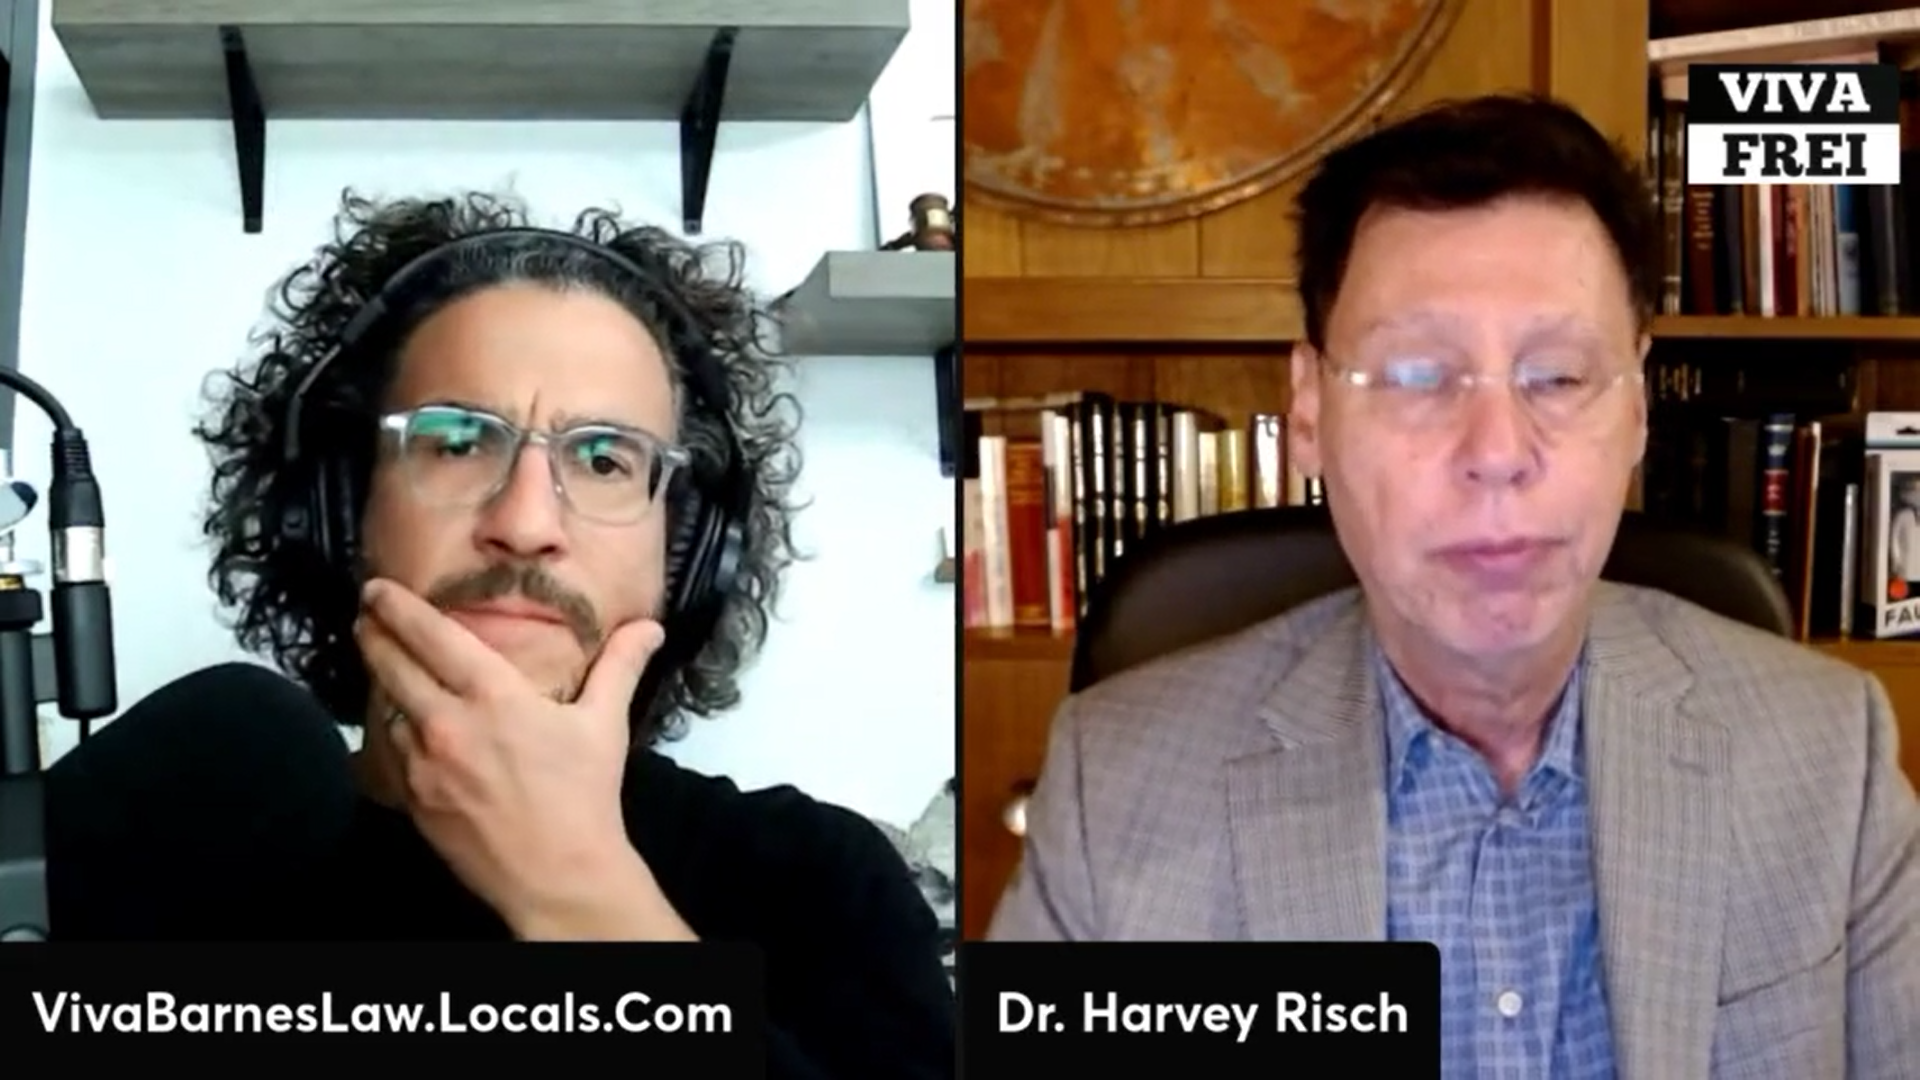 Dr. Harvey Risch joins Viva Frei to discuss the global pandemic response